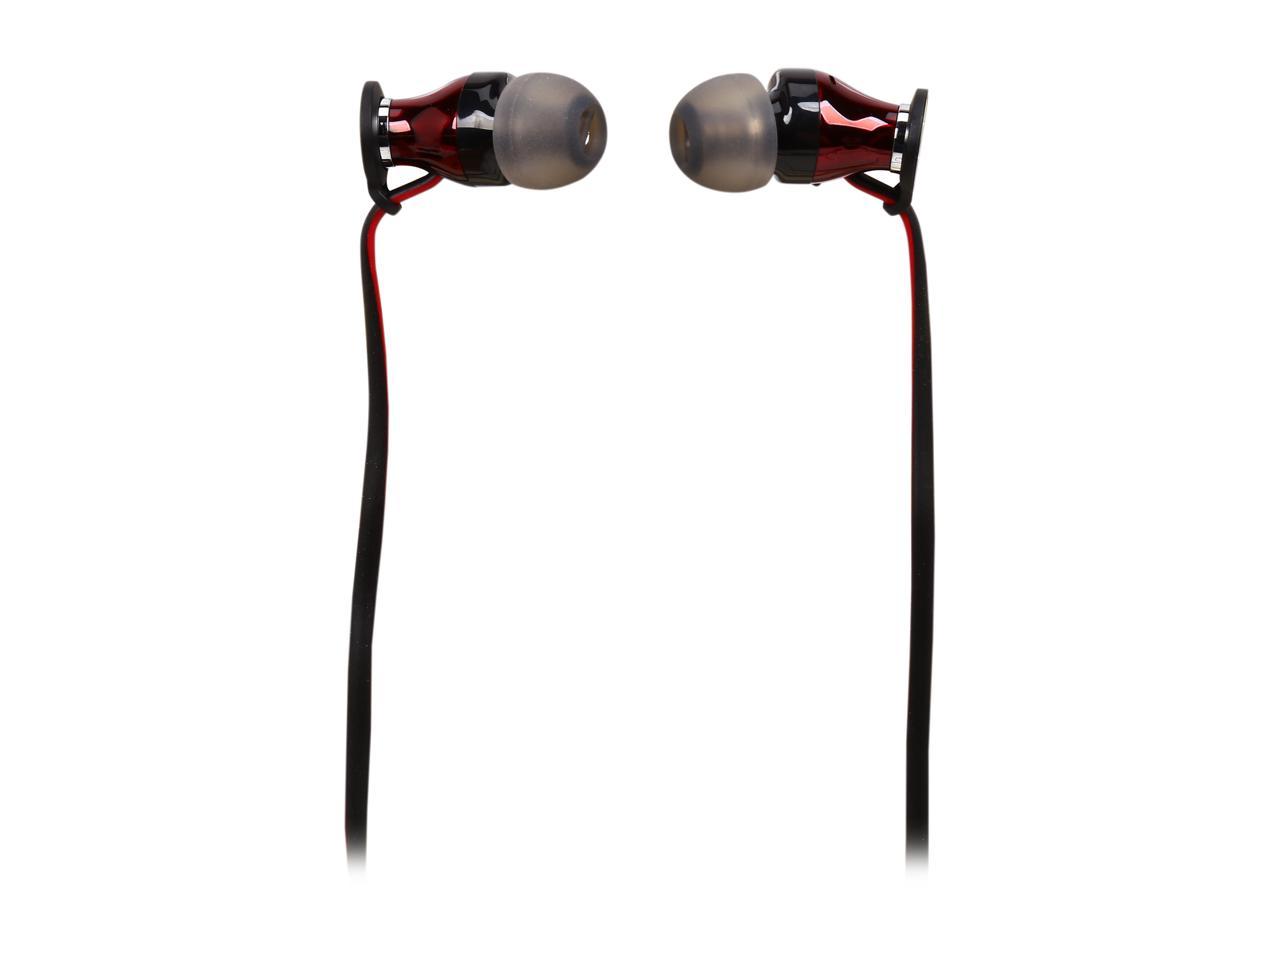 Sennheiser M2IEG Momentum In-Ear Headphones - Galaxy /Android Devices - Black / Red (506244)